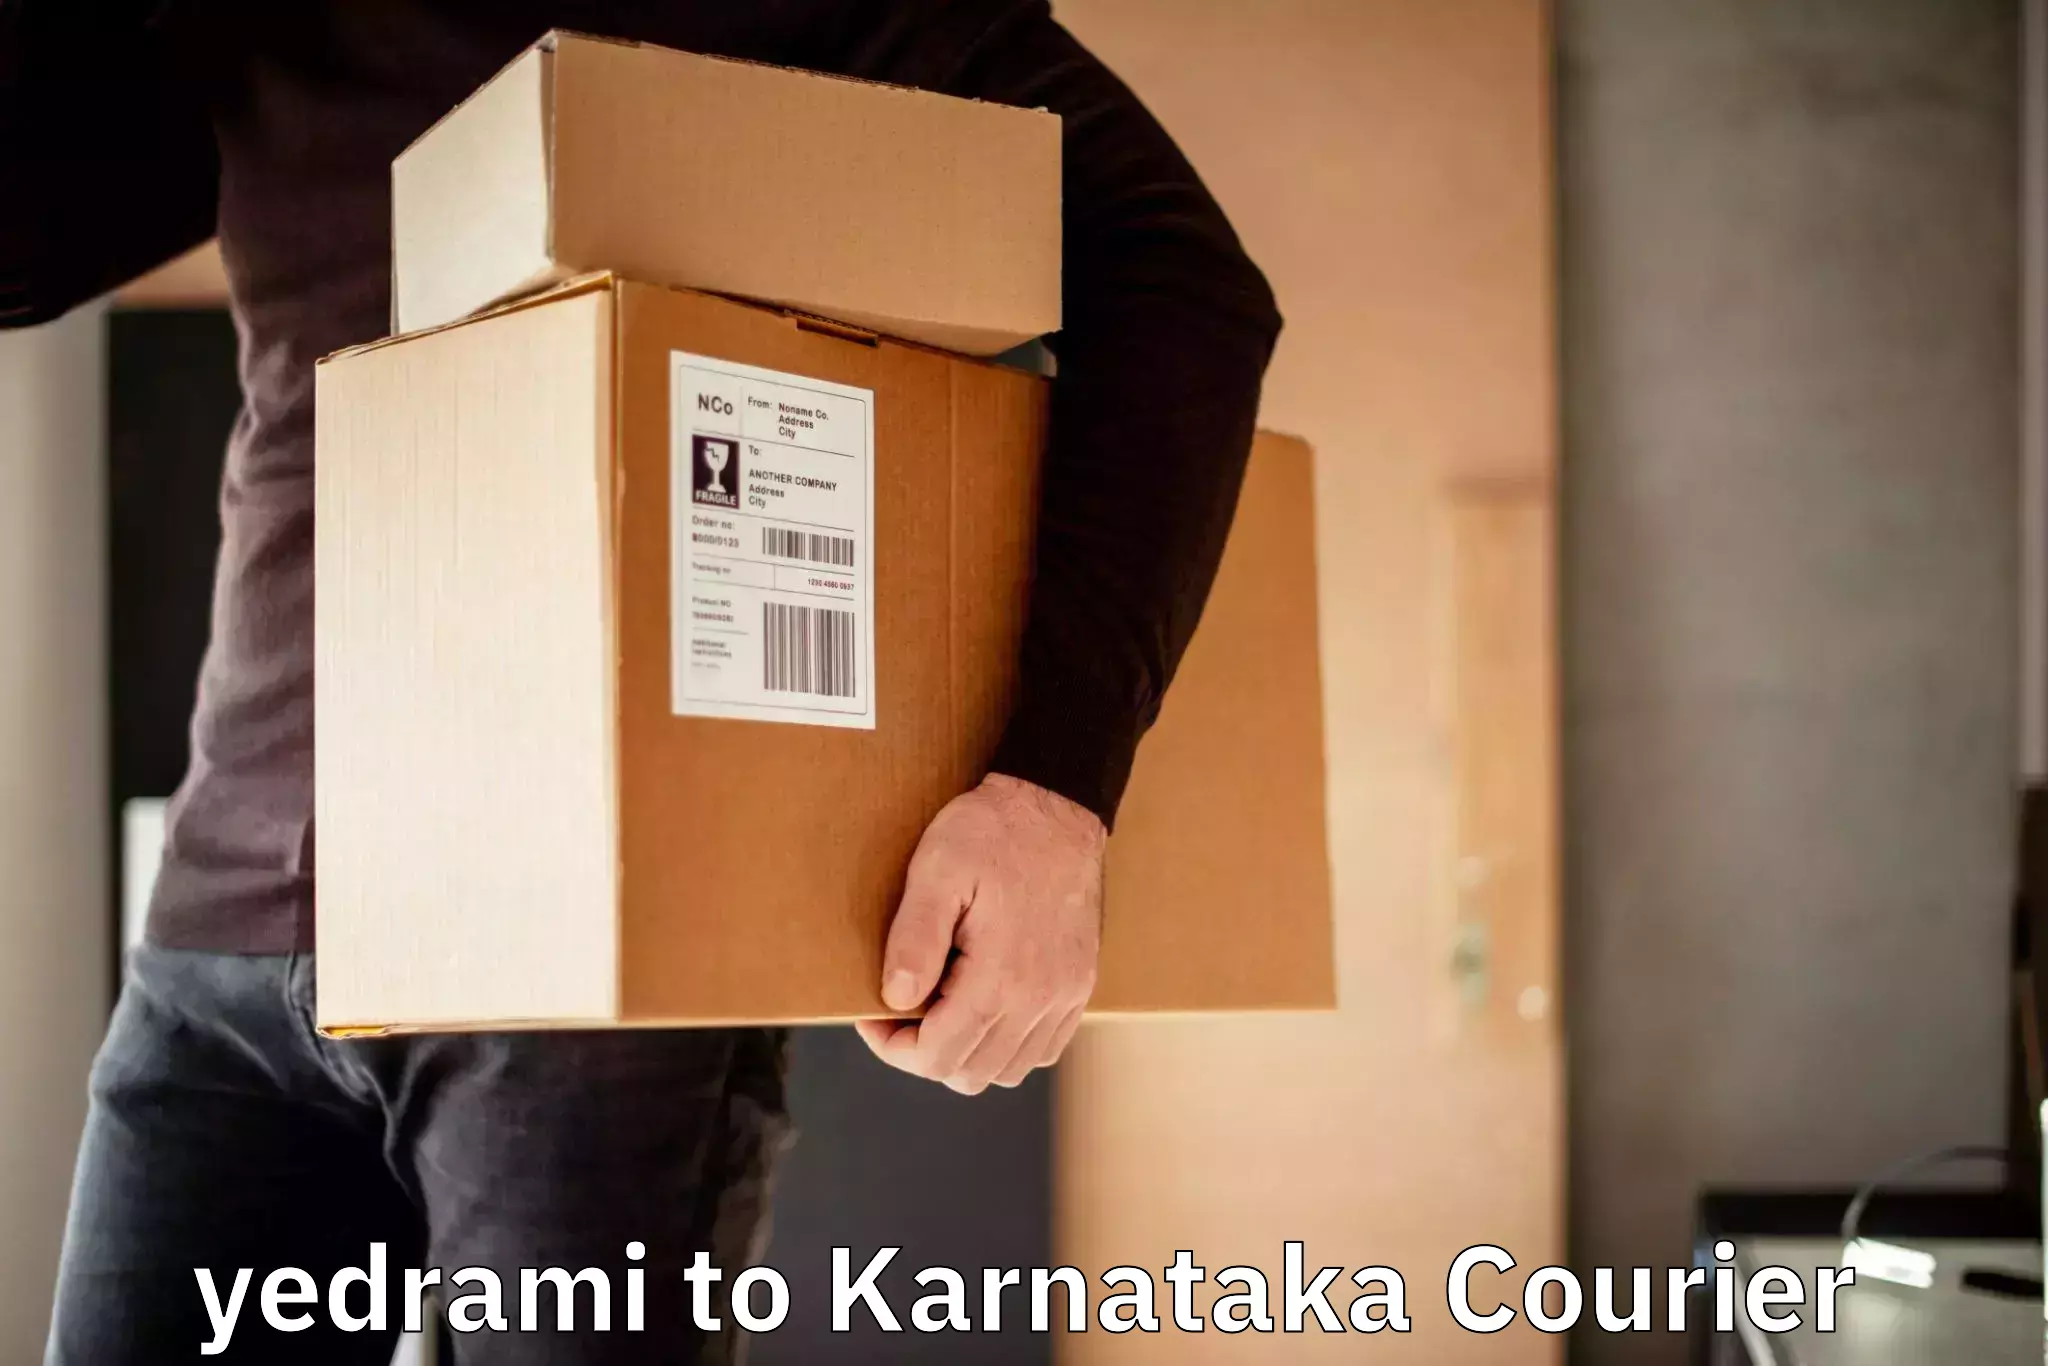 Reliable courier services yedrami to Yaragatti